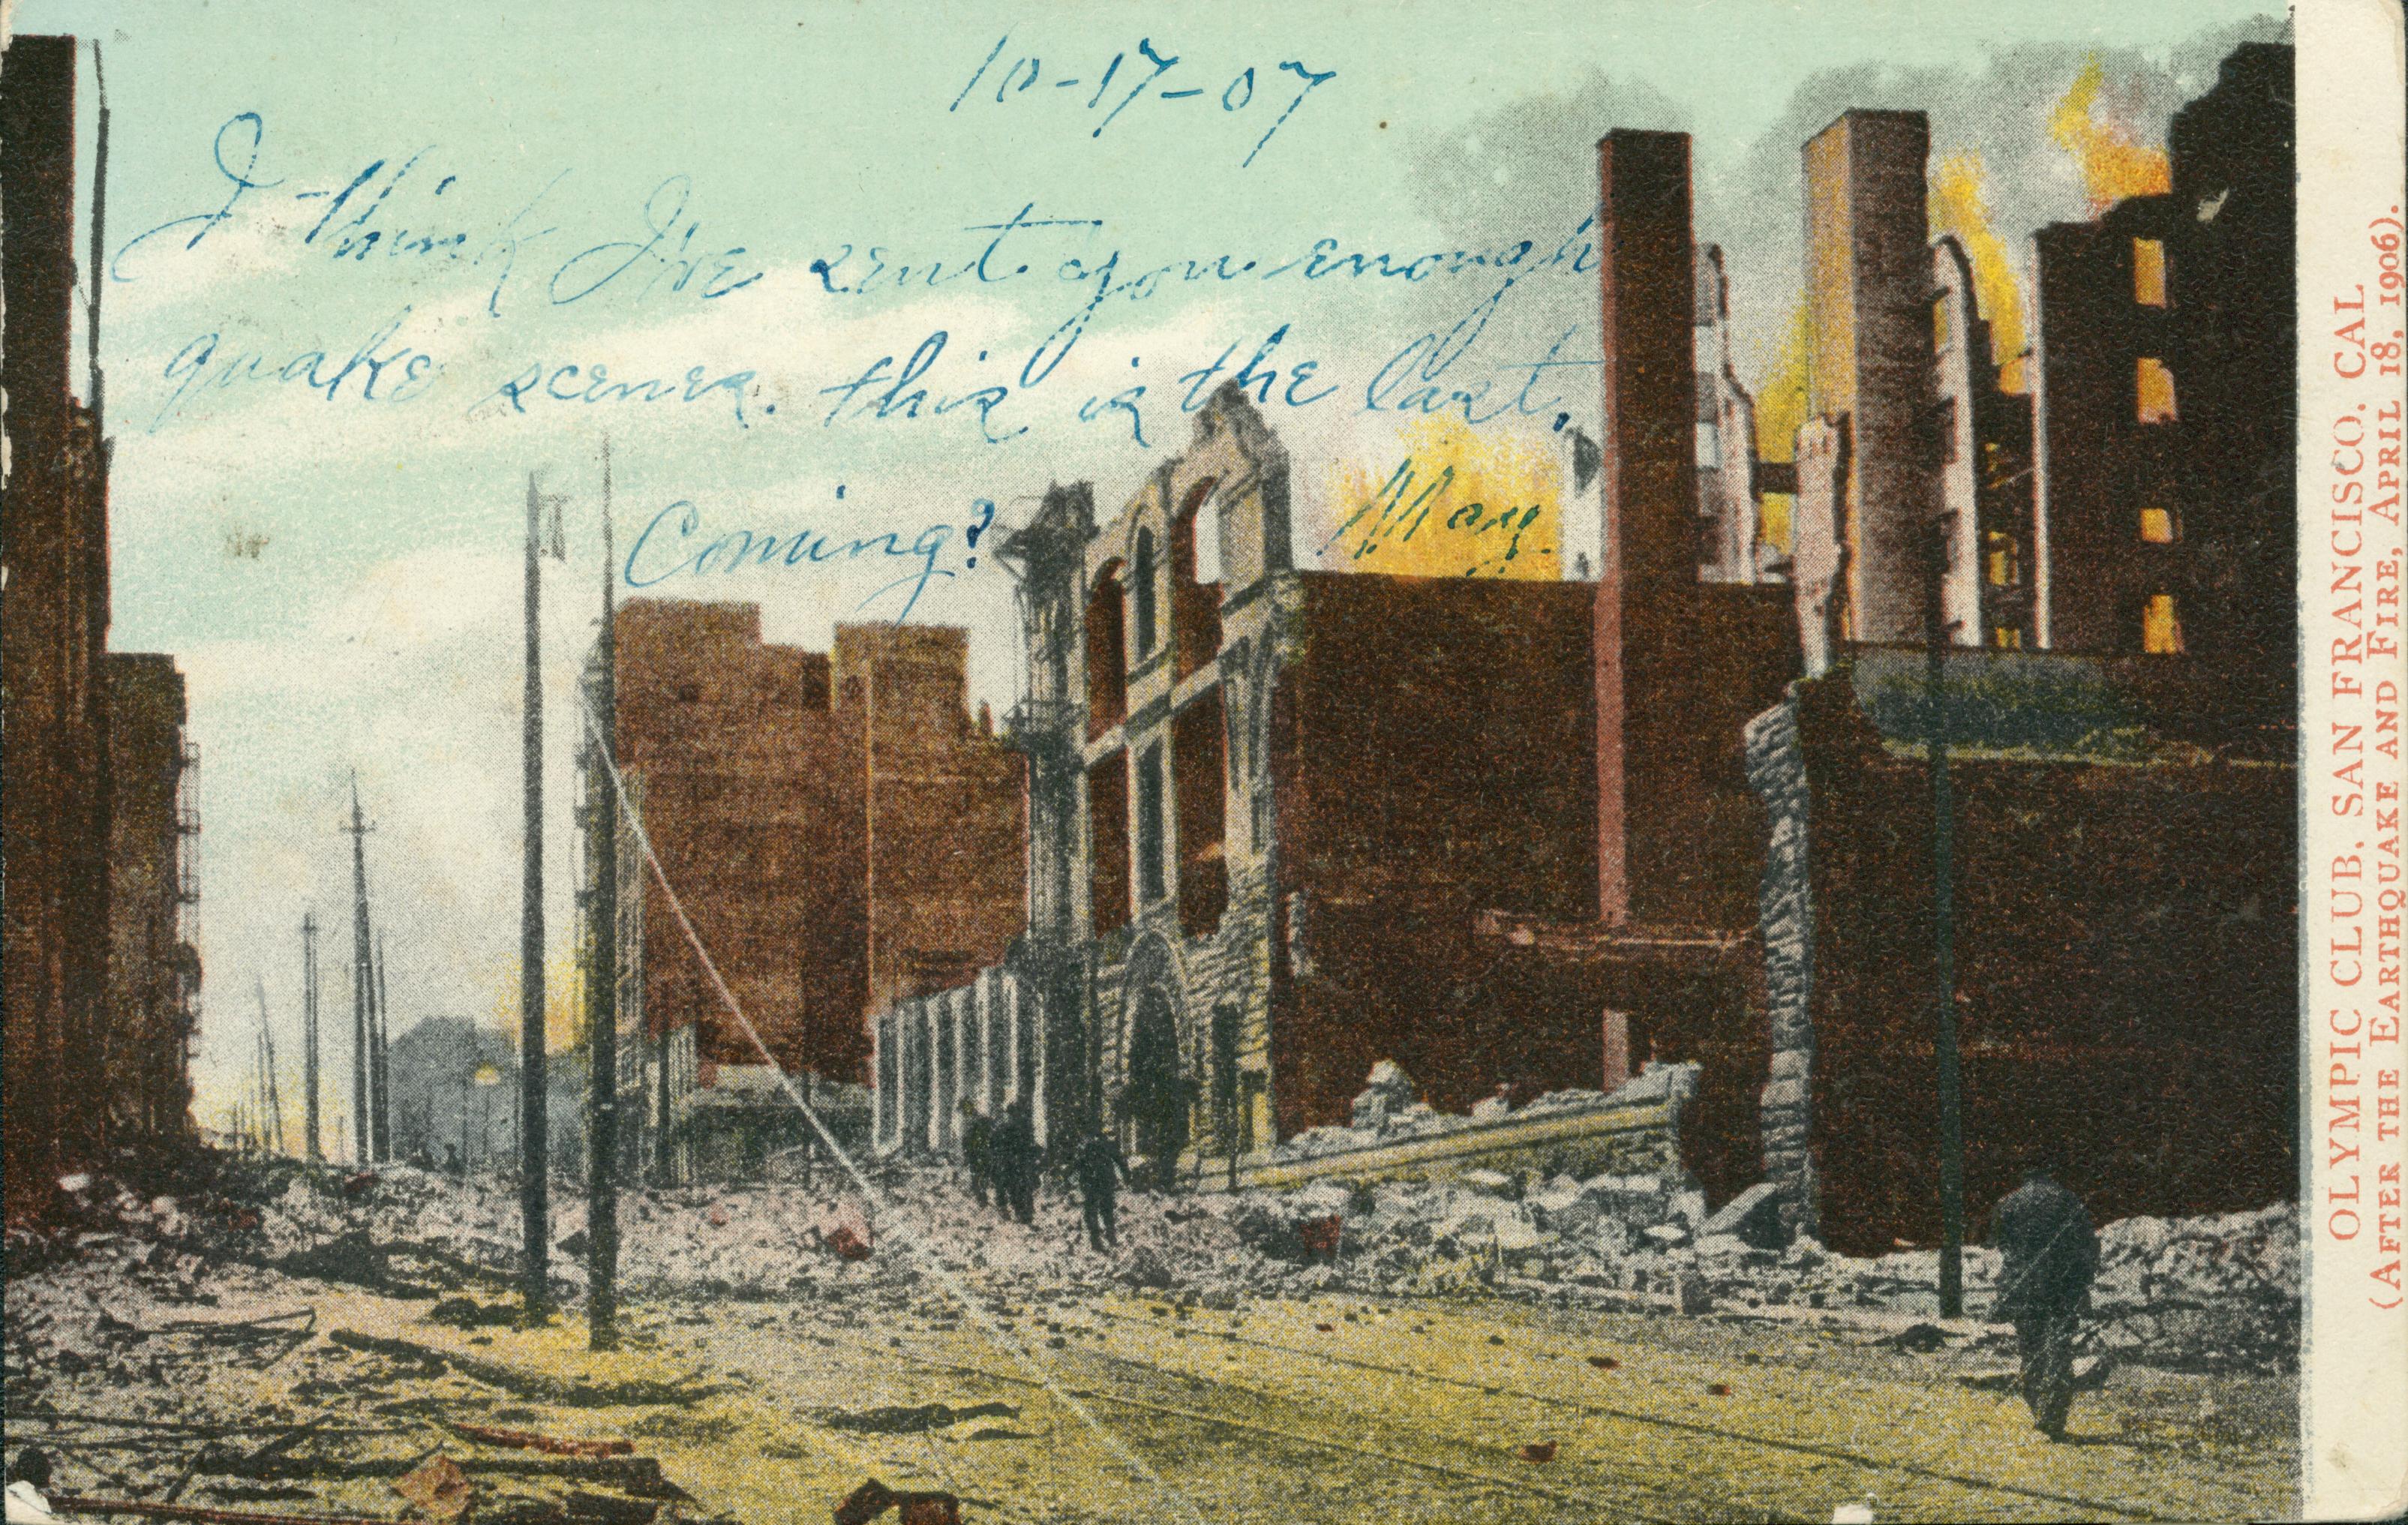 Drawing of the destruction of the Olympic Club.